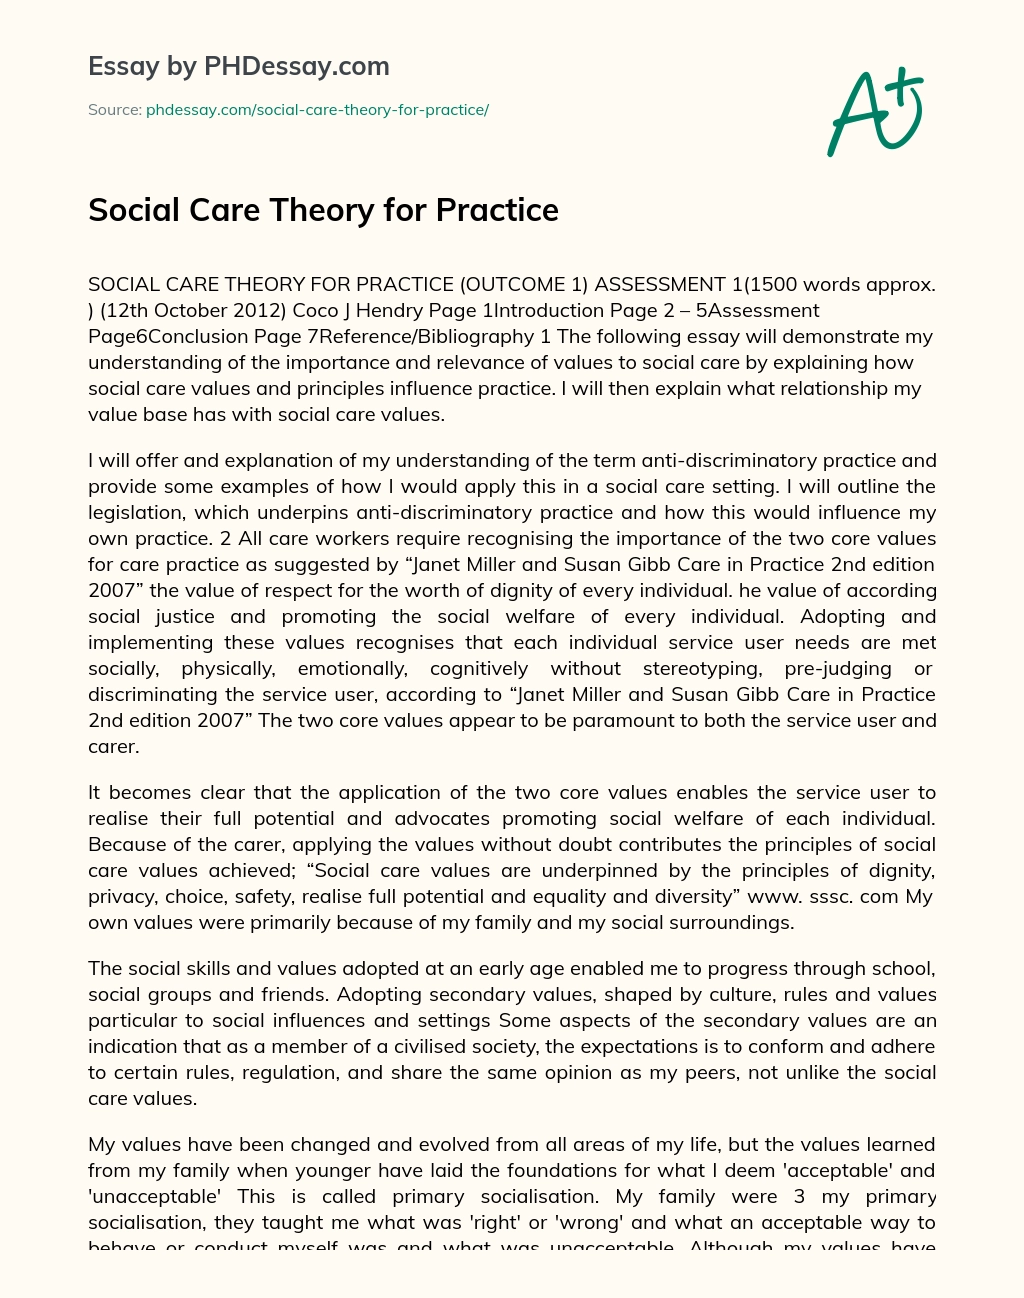 Social Care Theory for Practice essay